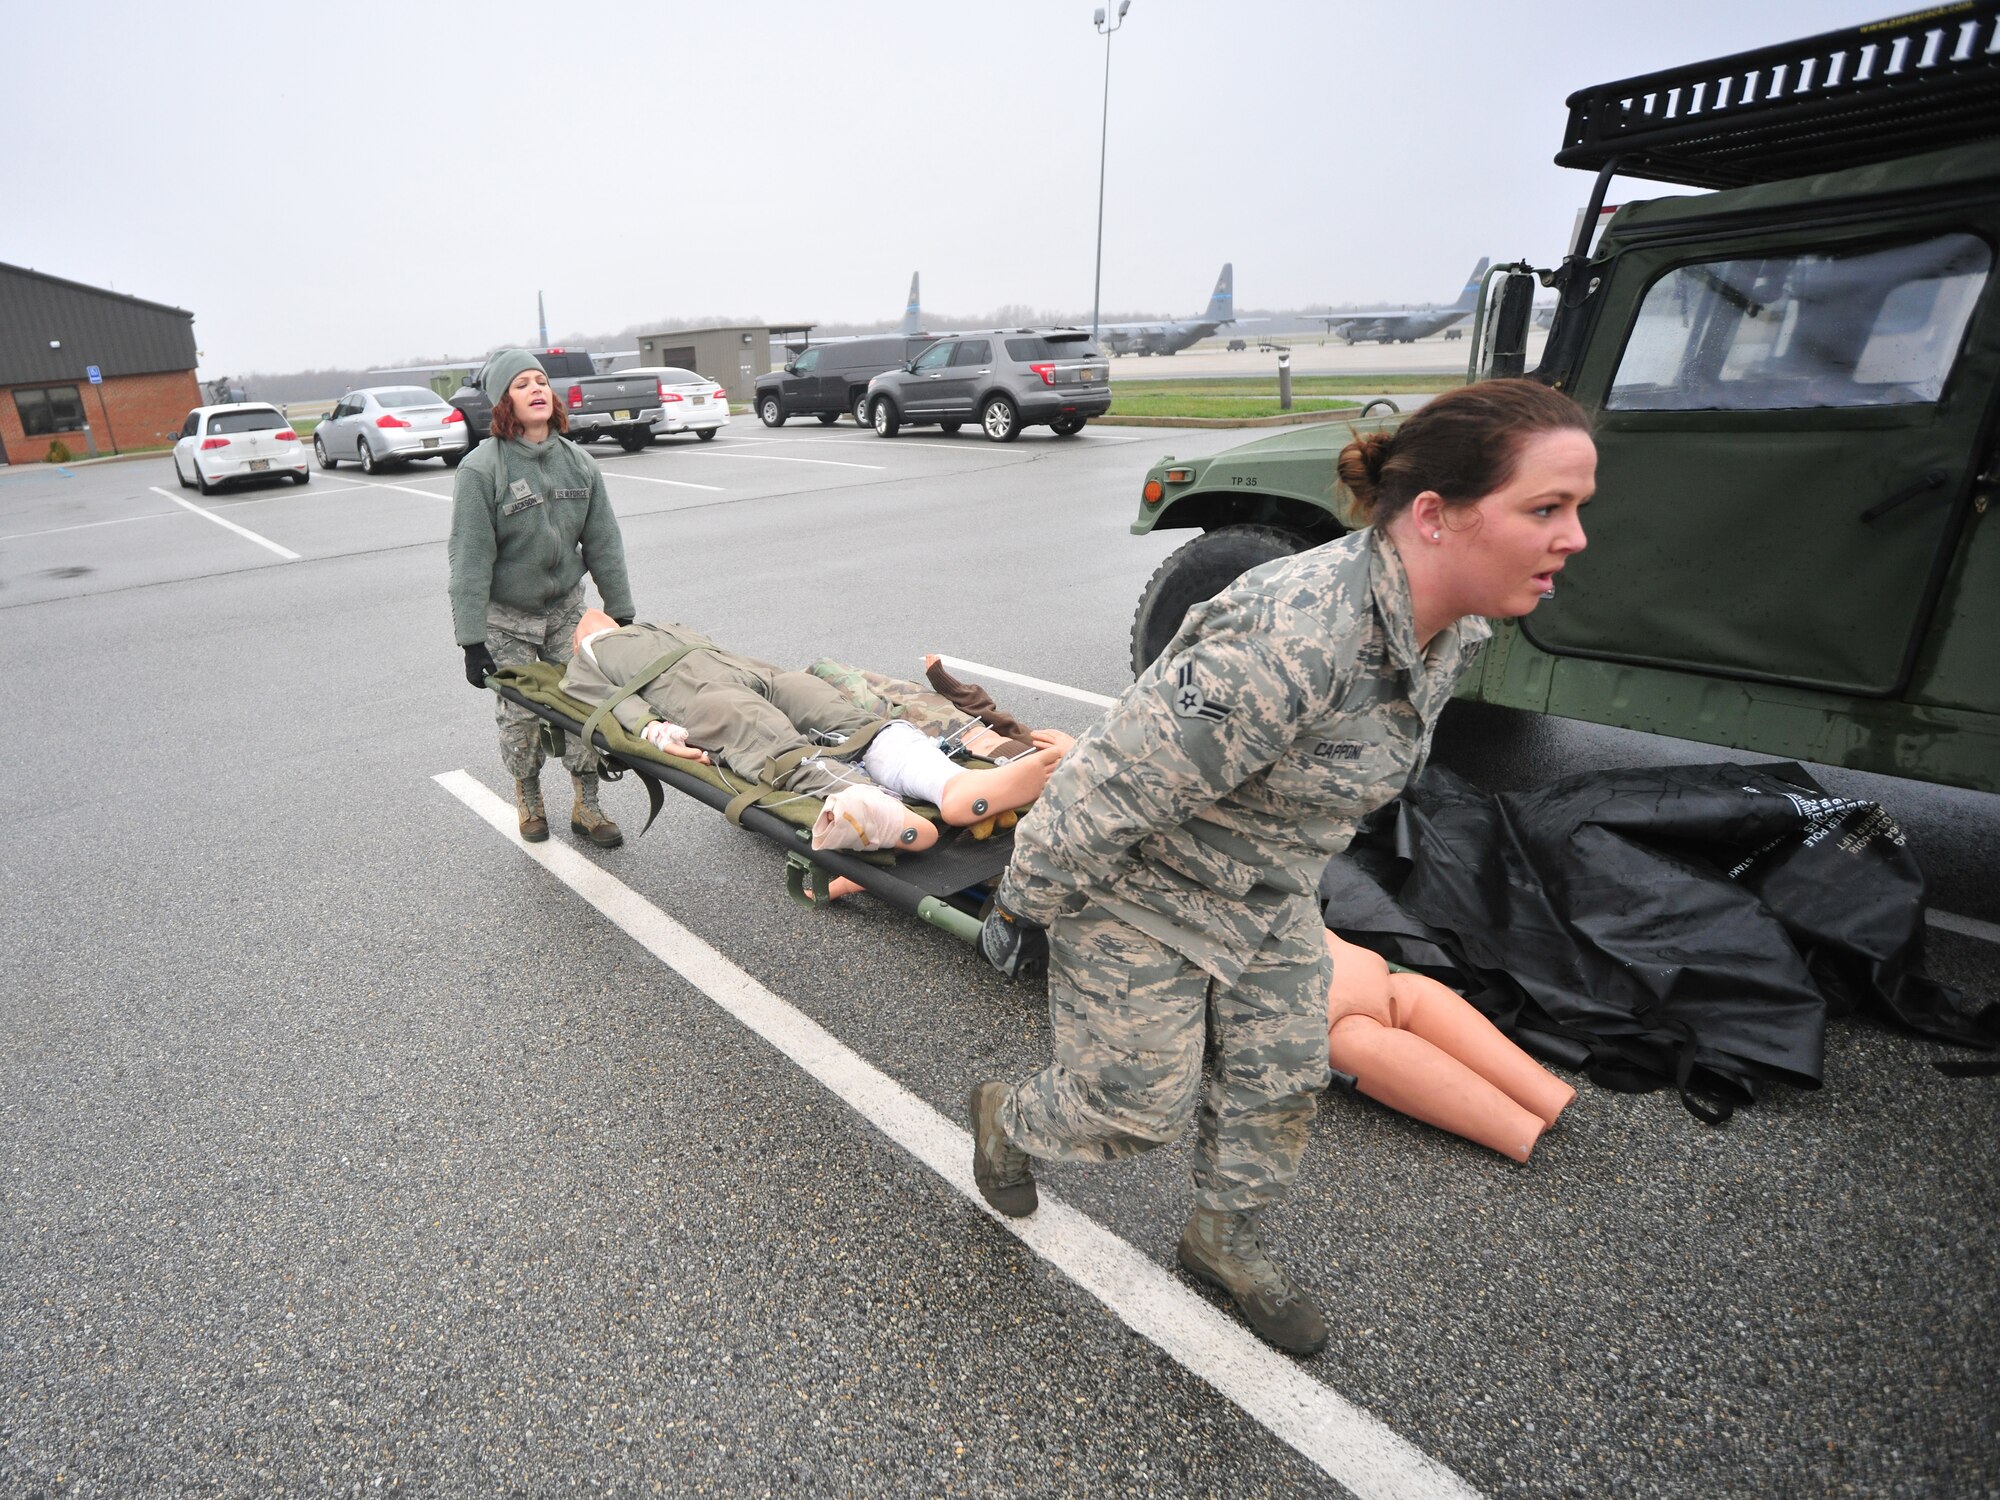 Airman 1st Class Jennifer Jackson and Airman Destinee Capponi, 166th Medical Group, Delaware Air National Guard, move a mannequin aboard a litter to place inside a Enroute Patient Staging System tent April 10, 2015 at the New Castle ANG Base, Del. The work is in preparation for use on April 11 during Operation Cyclone, a Delaware National Guard joint training exercise. Airmen and Soldiers will respond to a simulated tornado that has swept through New Castle County, and Army Black Hawk helicopters will evacuate simulated wounded personnel to the air base, with patients loaded onto C-130s for aerial evacuation. (U.S. Air National Guard photo by Staff Sgt. John Michaels)